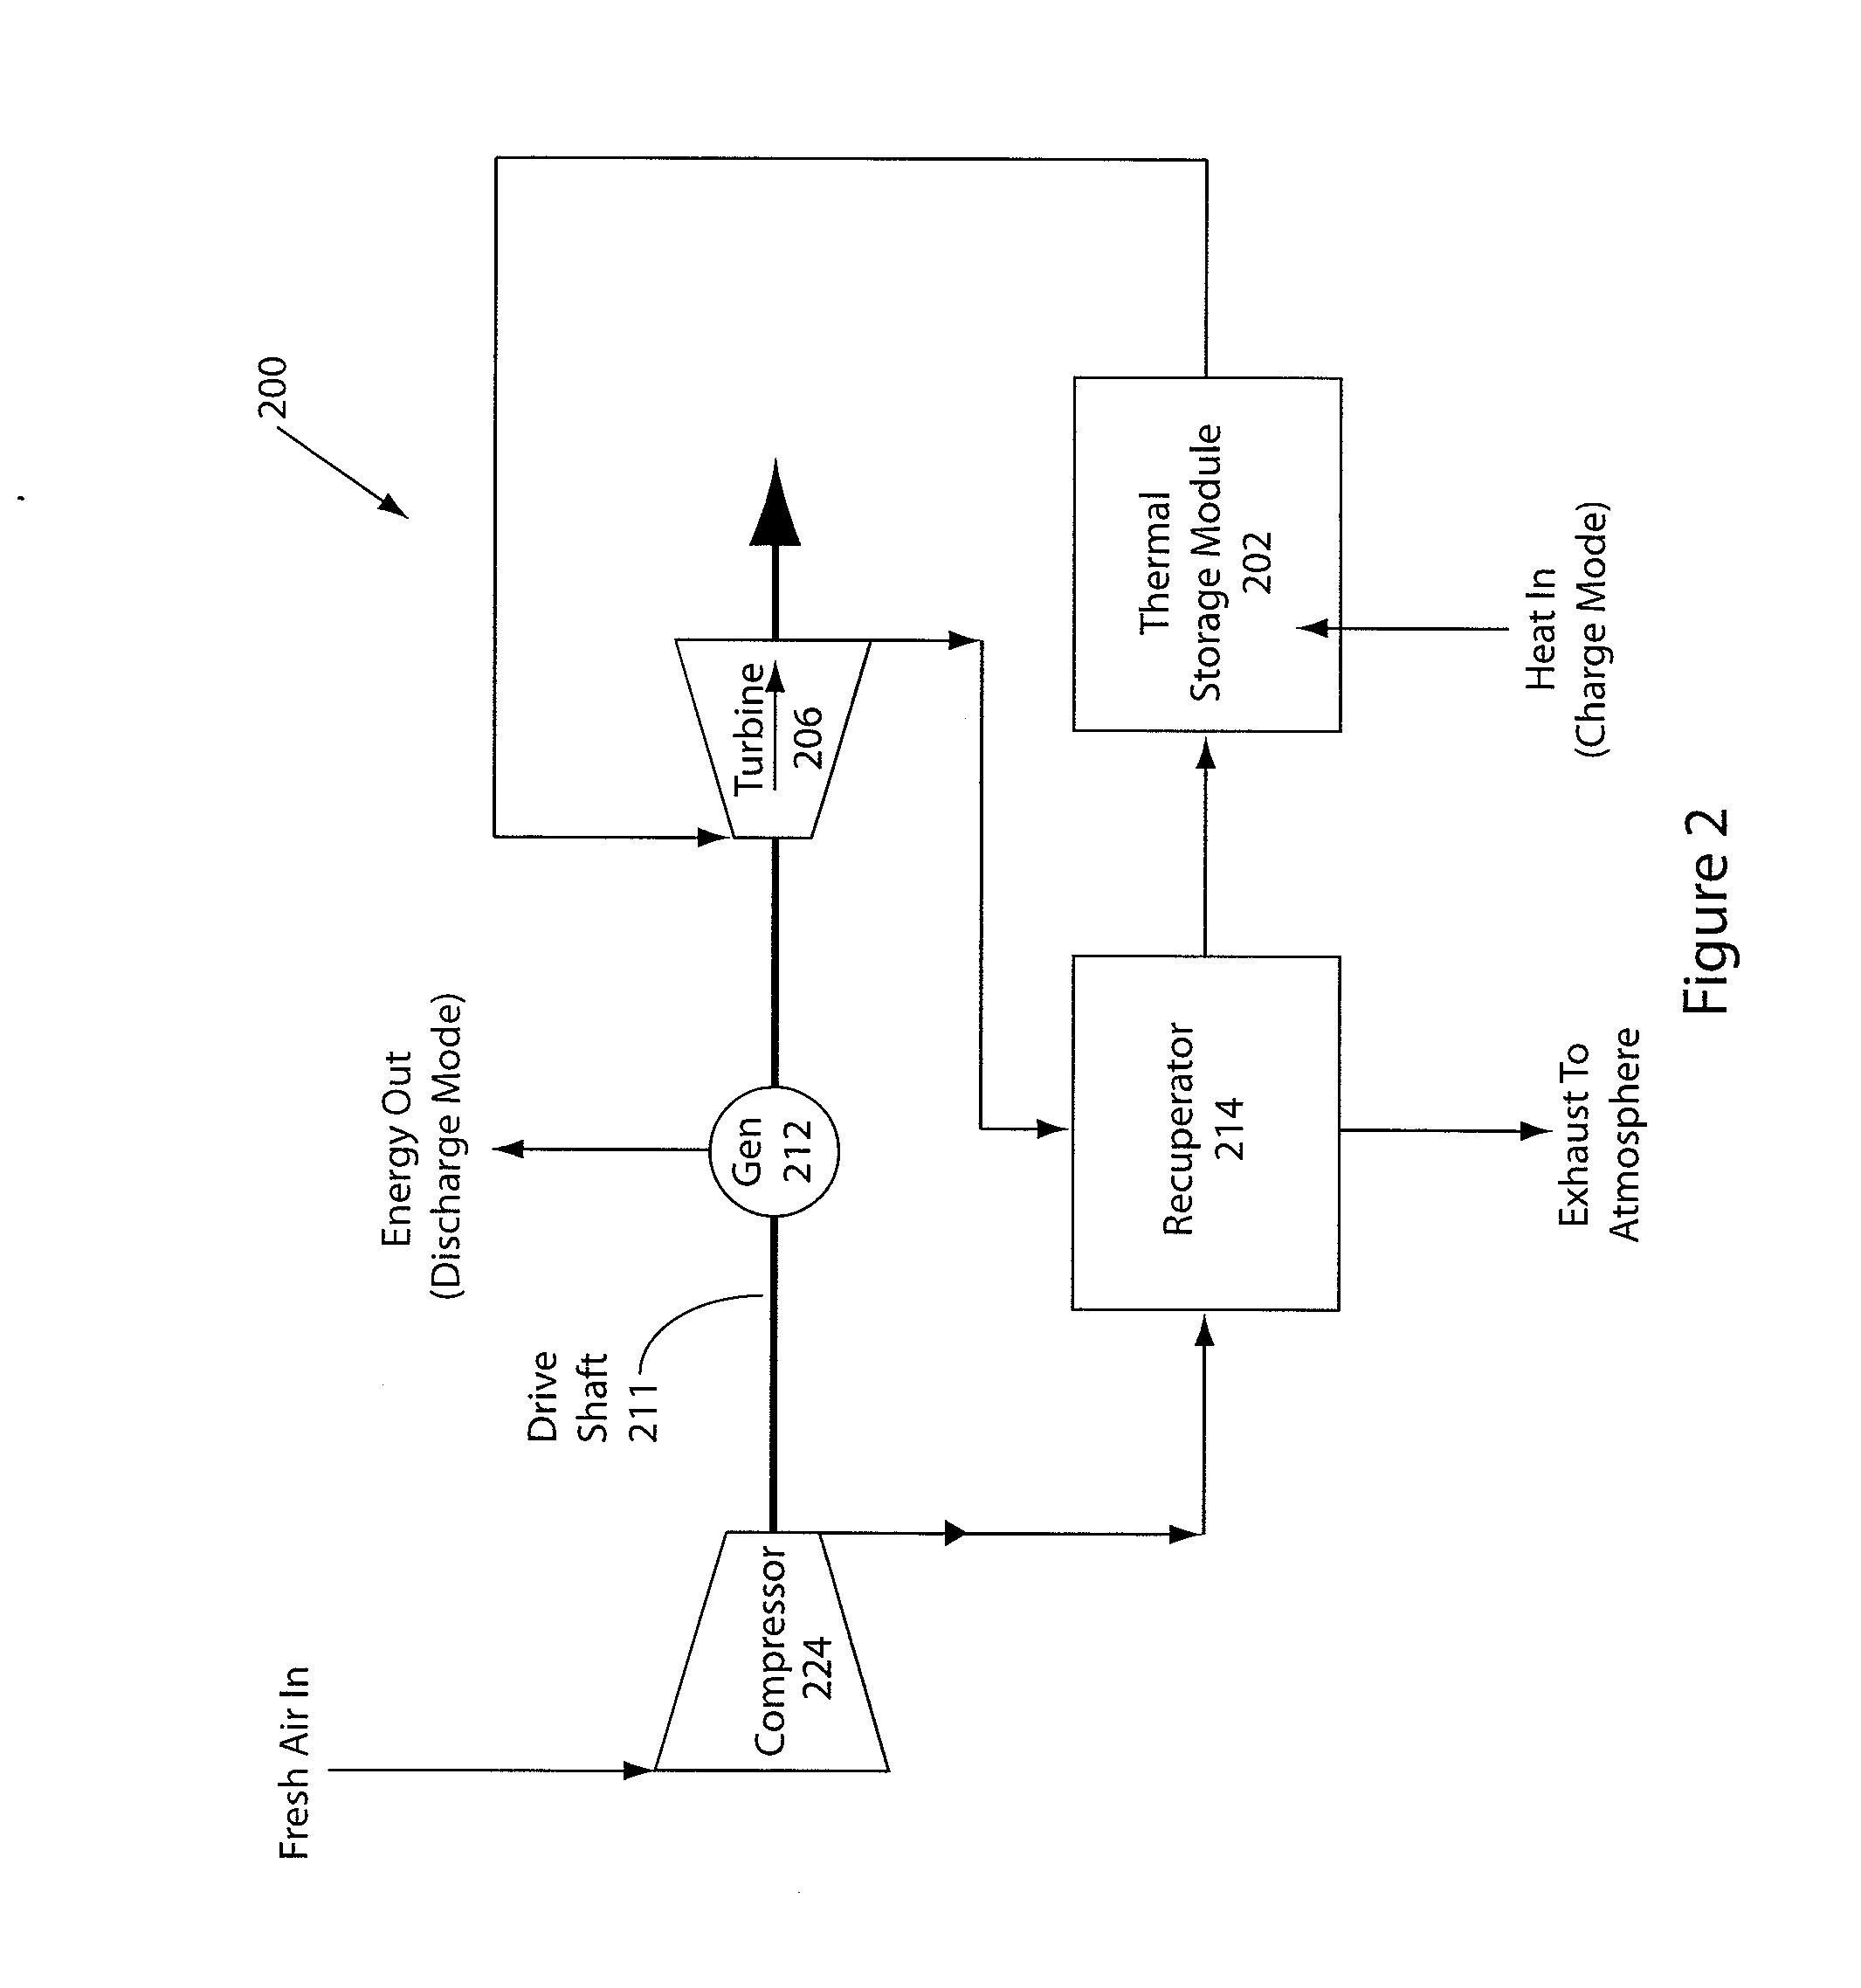 System and method for thermal energy storage and power generation